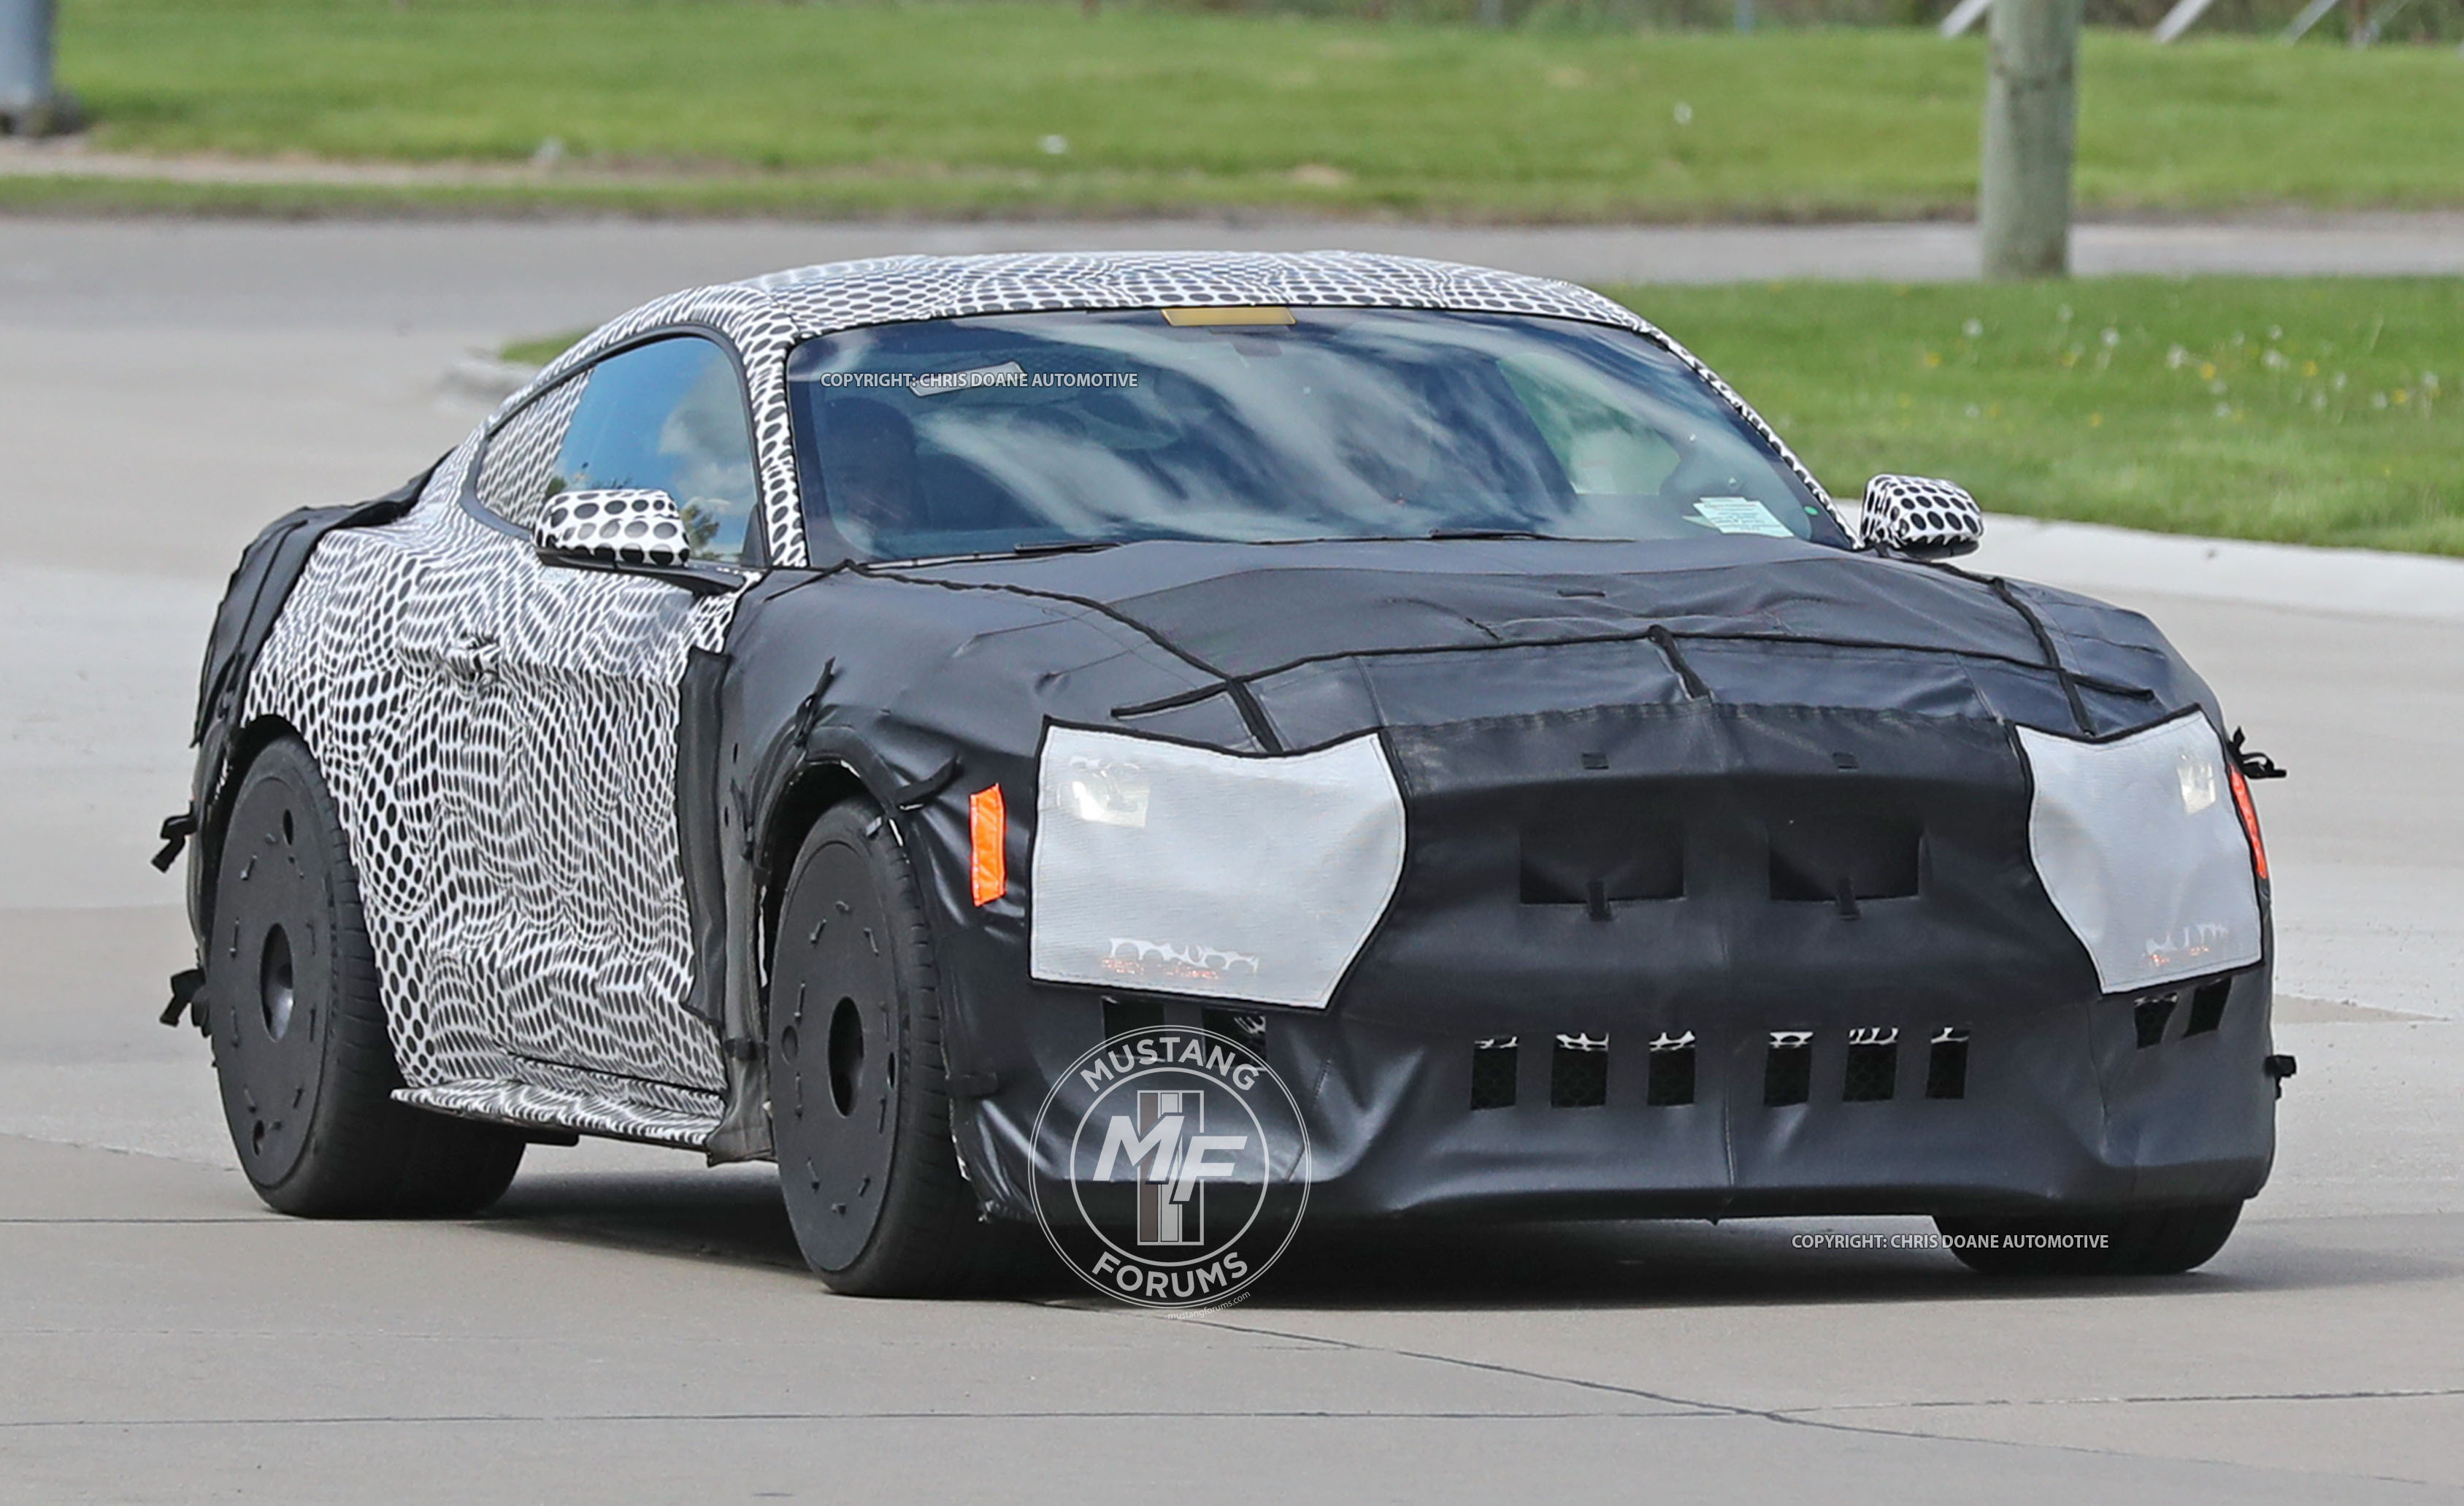 2019 Ford Mustang GT500 Full Prototype Caught in the Wild!